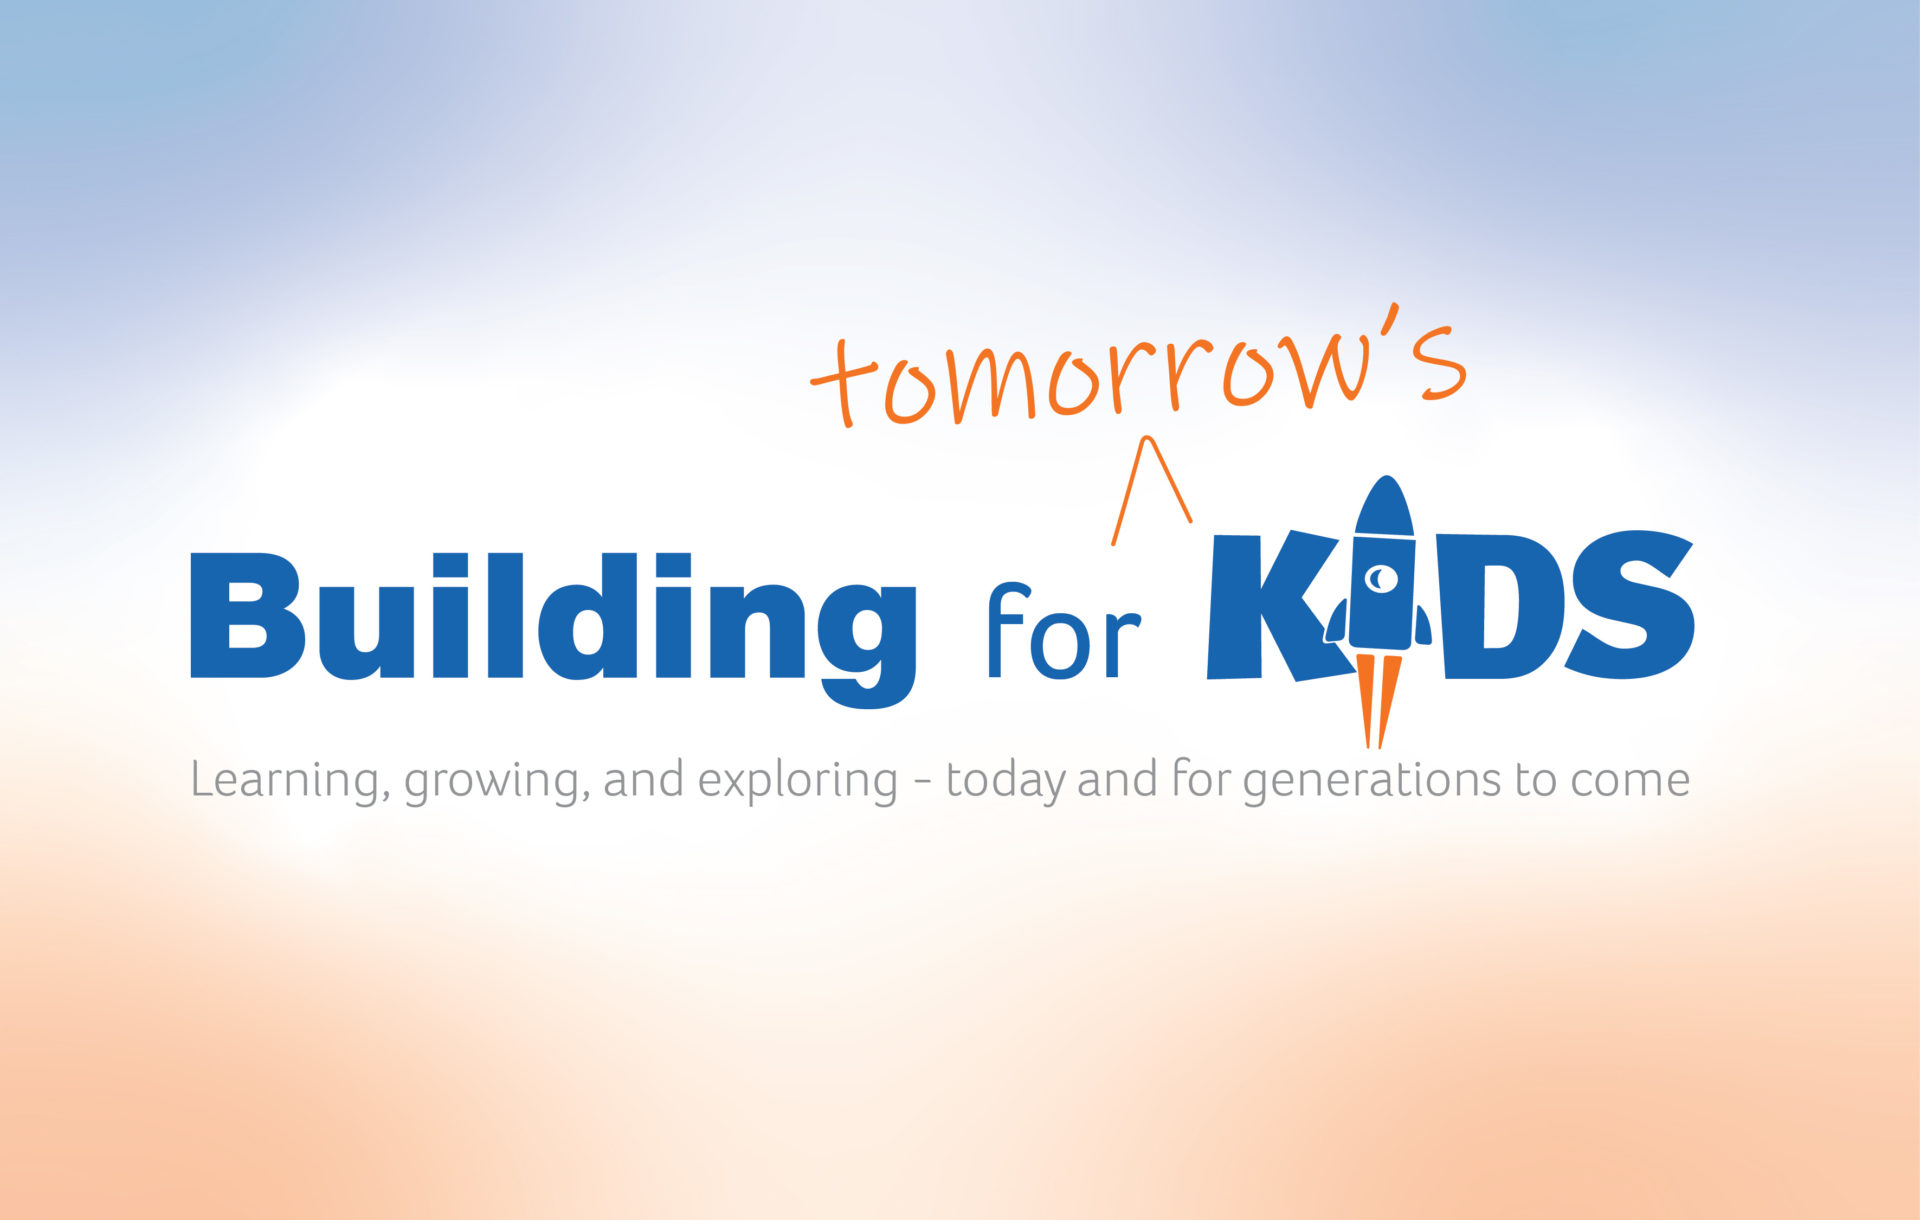 Building for Tomorrow’s Kids